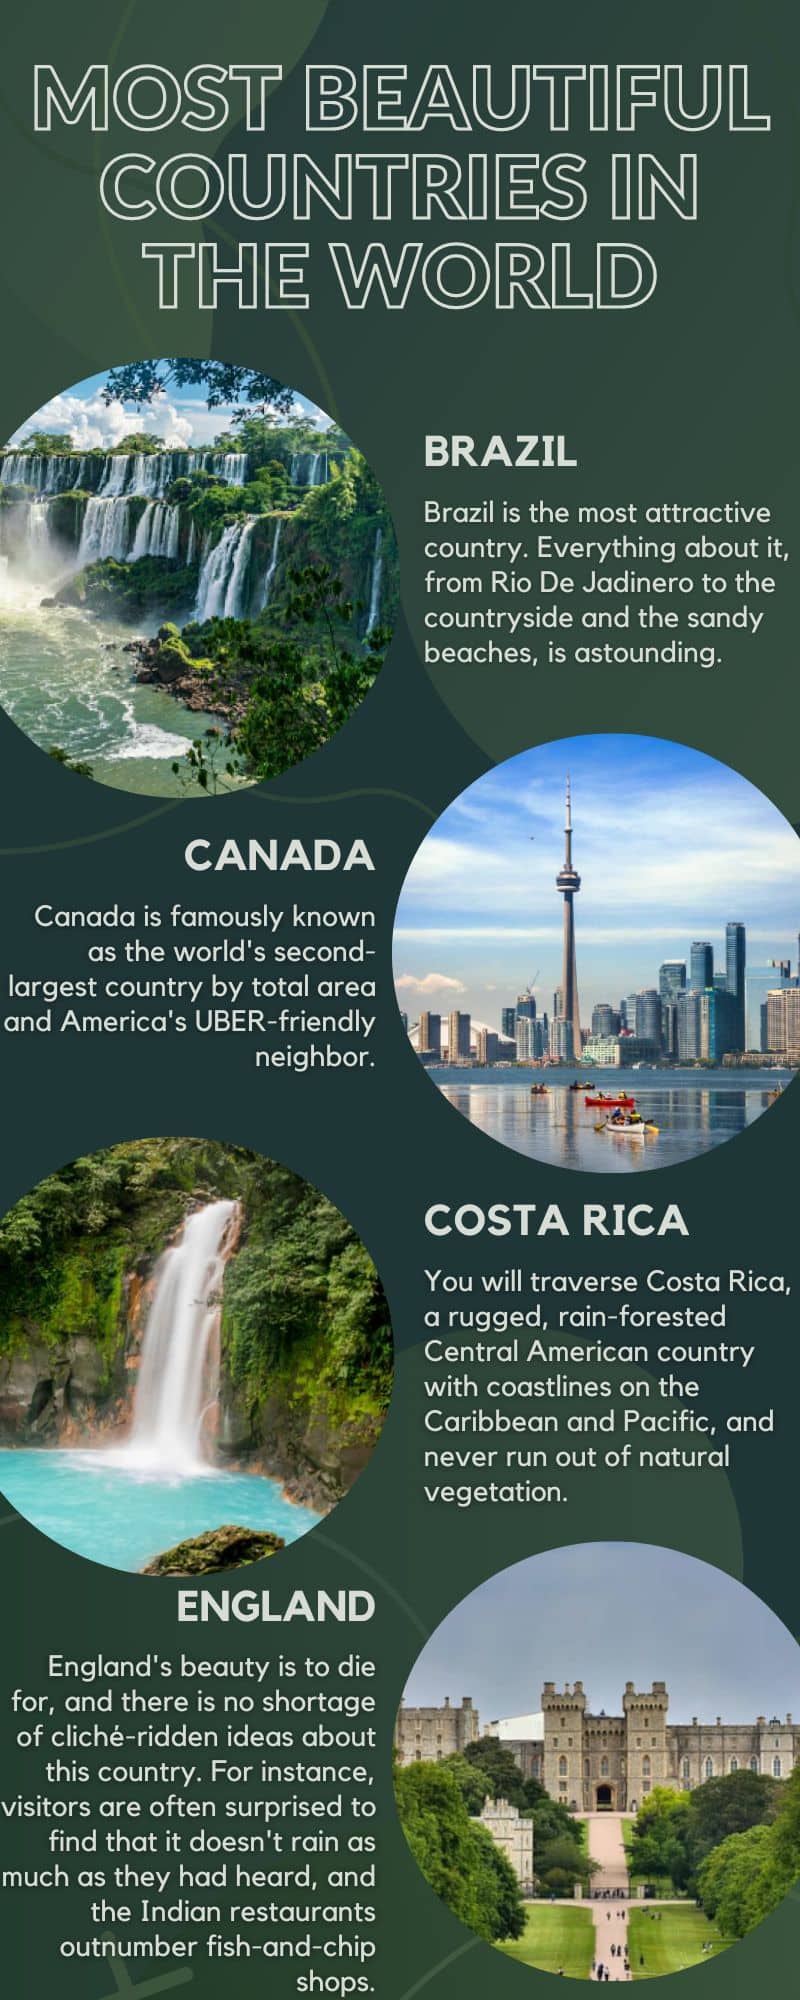 20 most beautiful countries in the world (with pictures) 2022 Tuko.co.ke